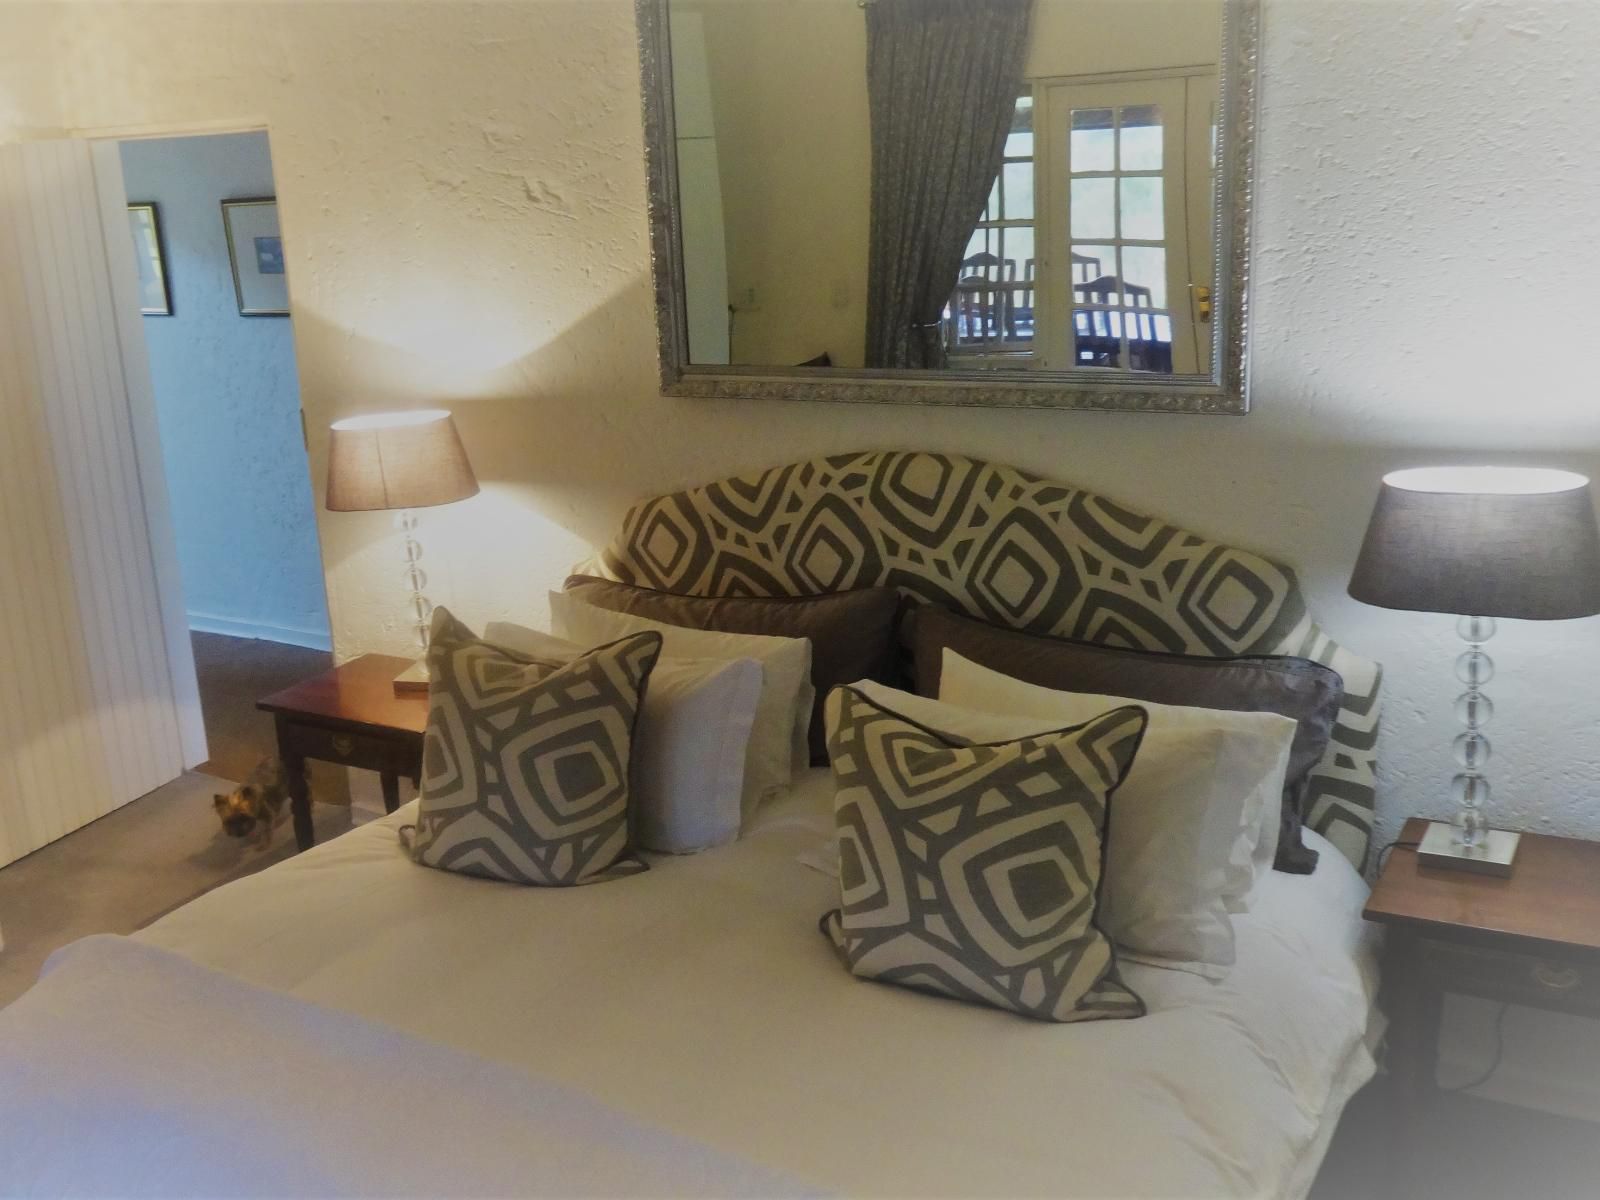 Willow Weir Cottage Dullstroom Mpumalanga South Africa Bedroom